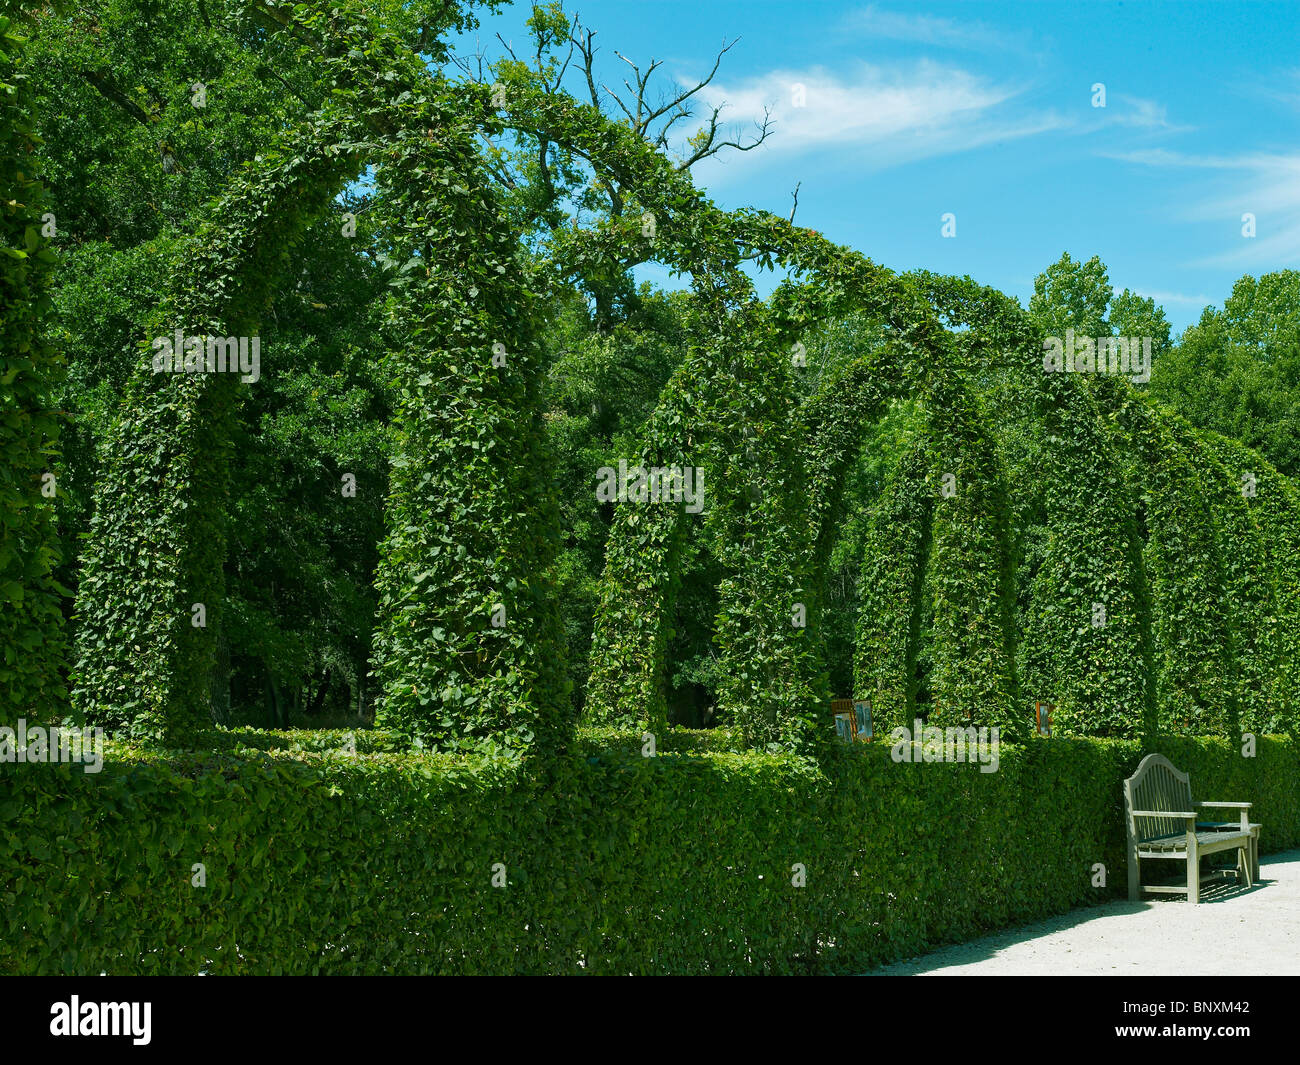 A view of the impressive clipped Hornbeams in the Renaissance Garden at Chamerolles Stock Photo